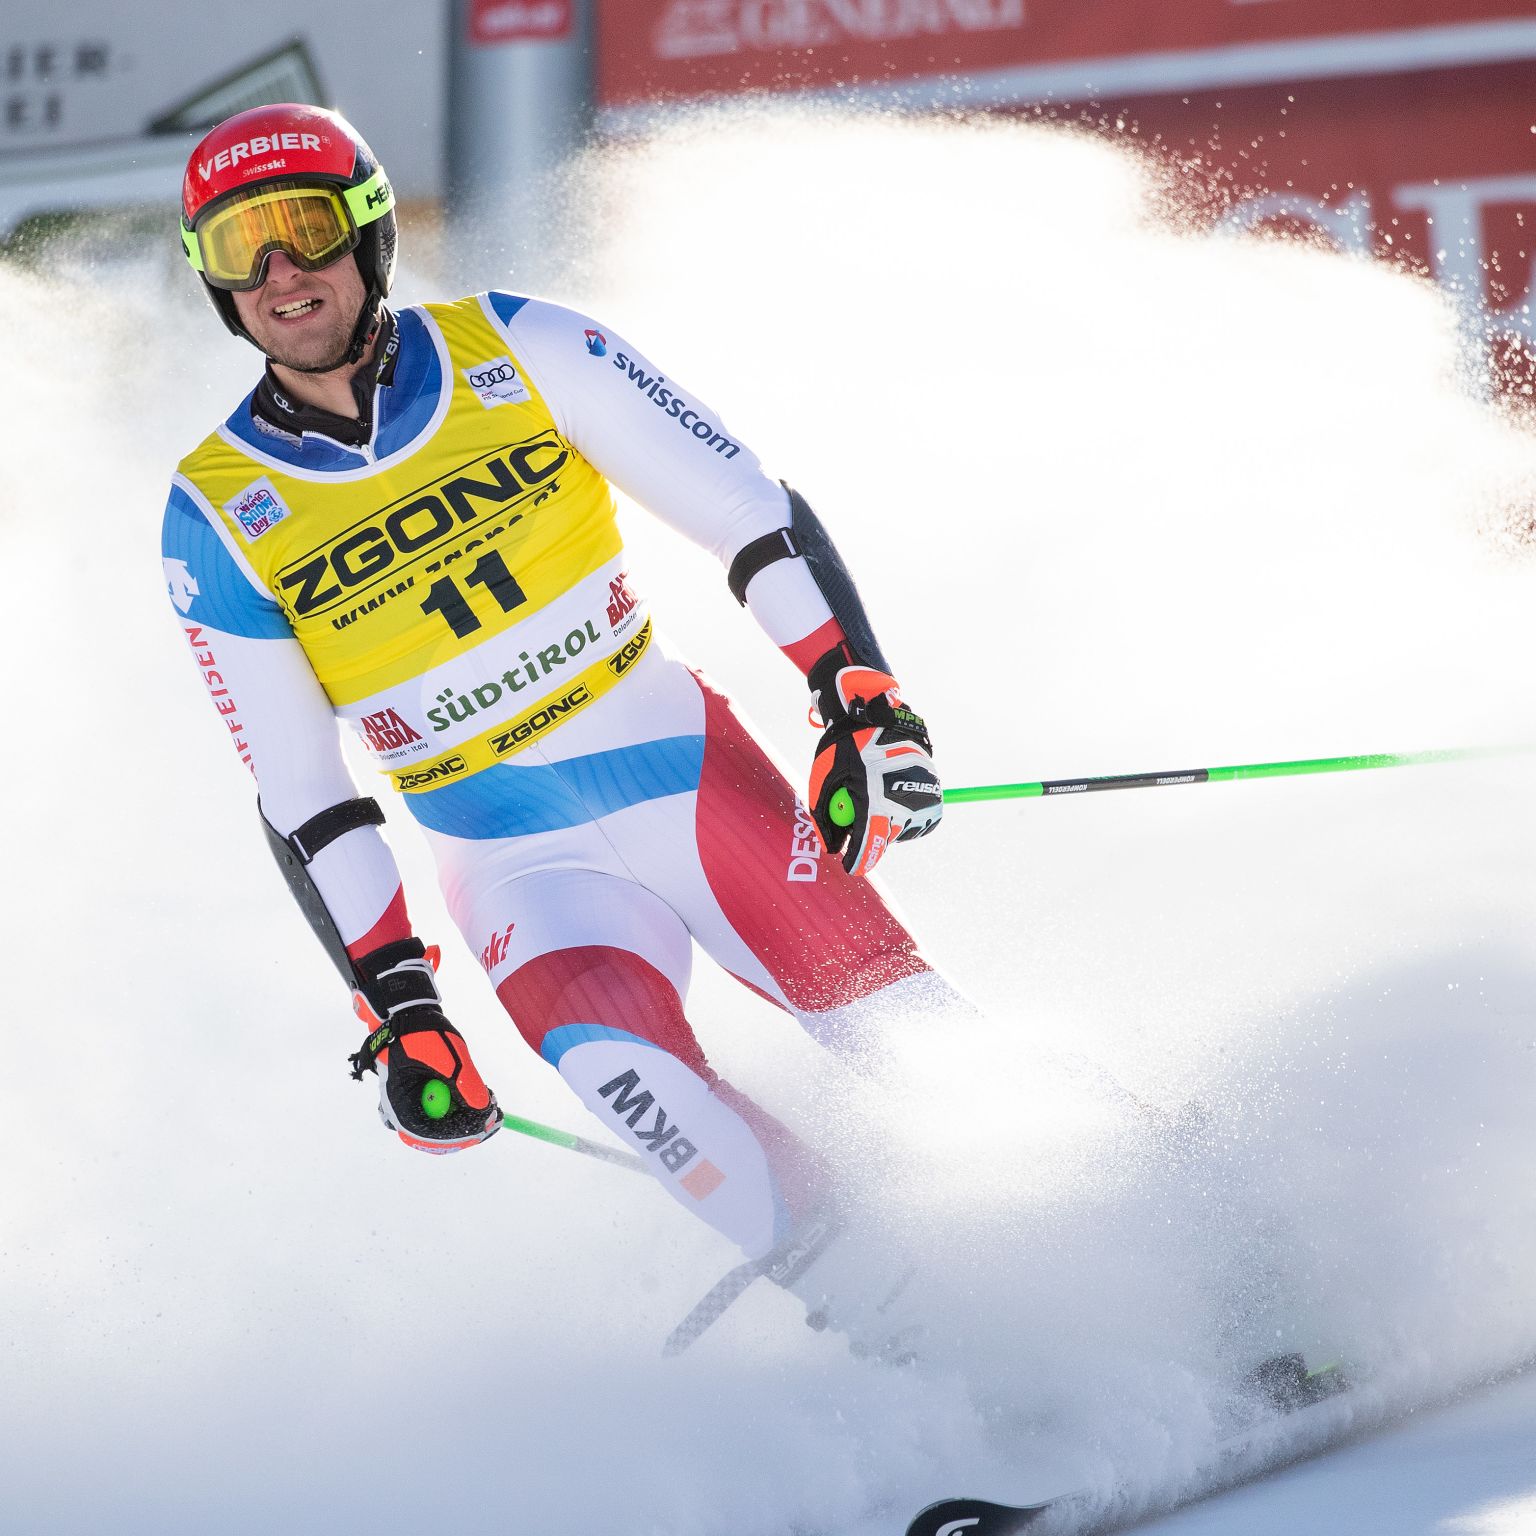 Justin Murisier, the skier from Bruson, at the finish of a world cup race.